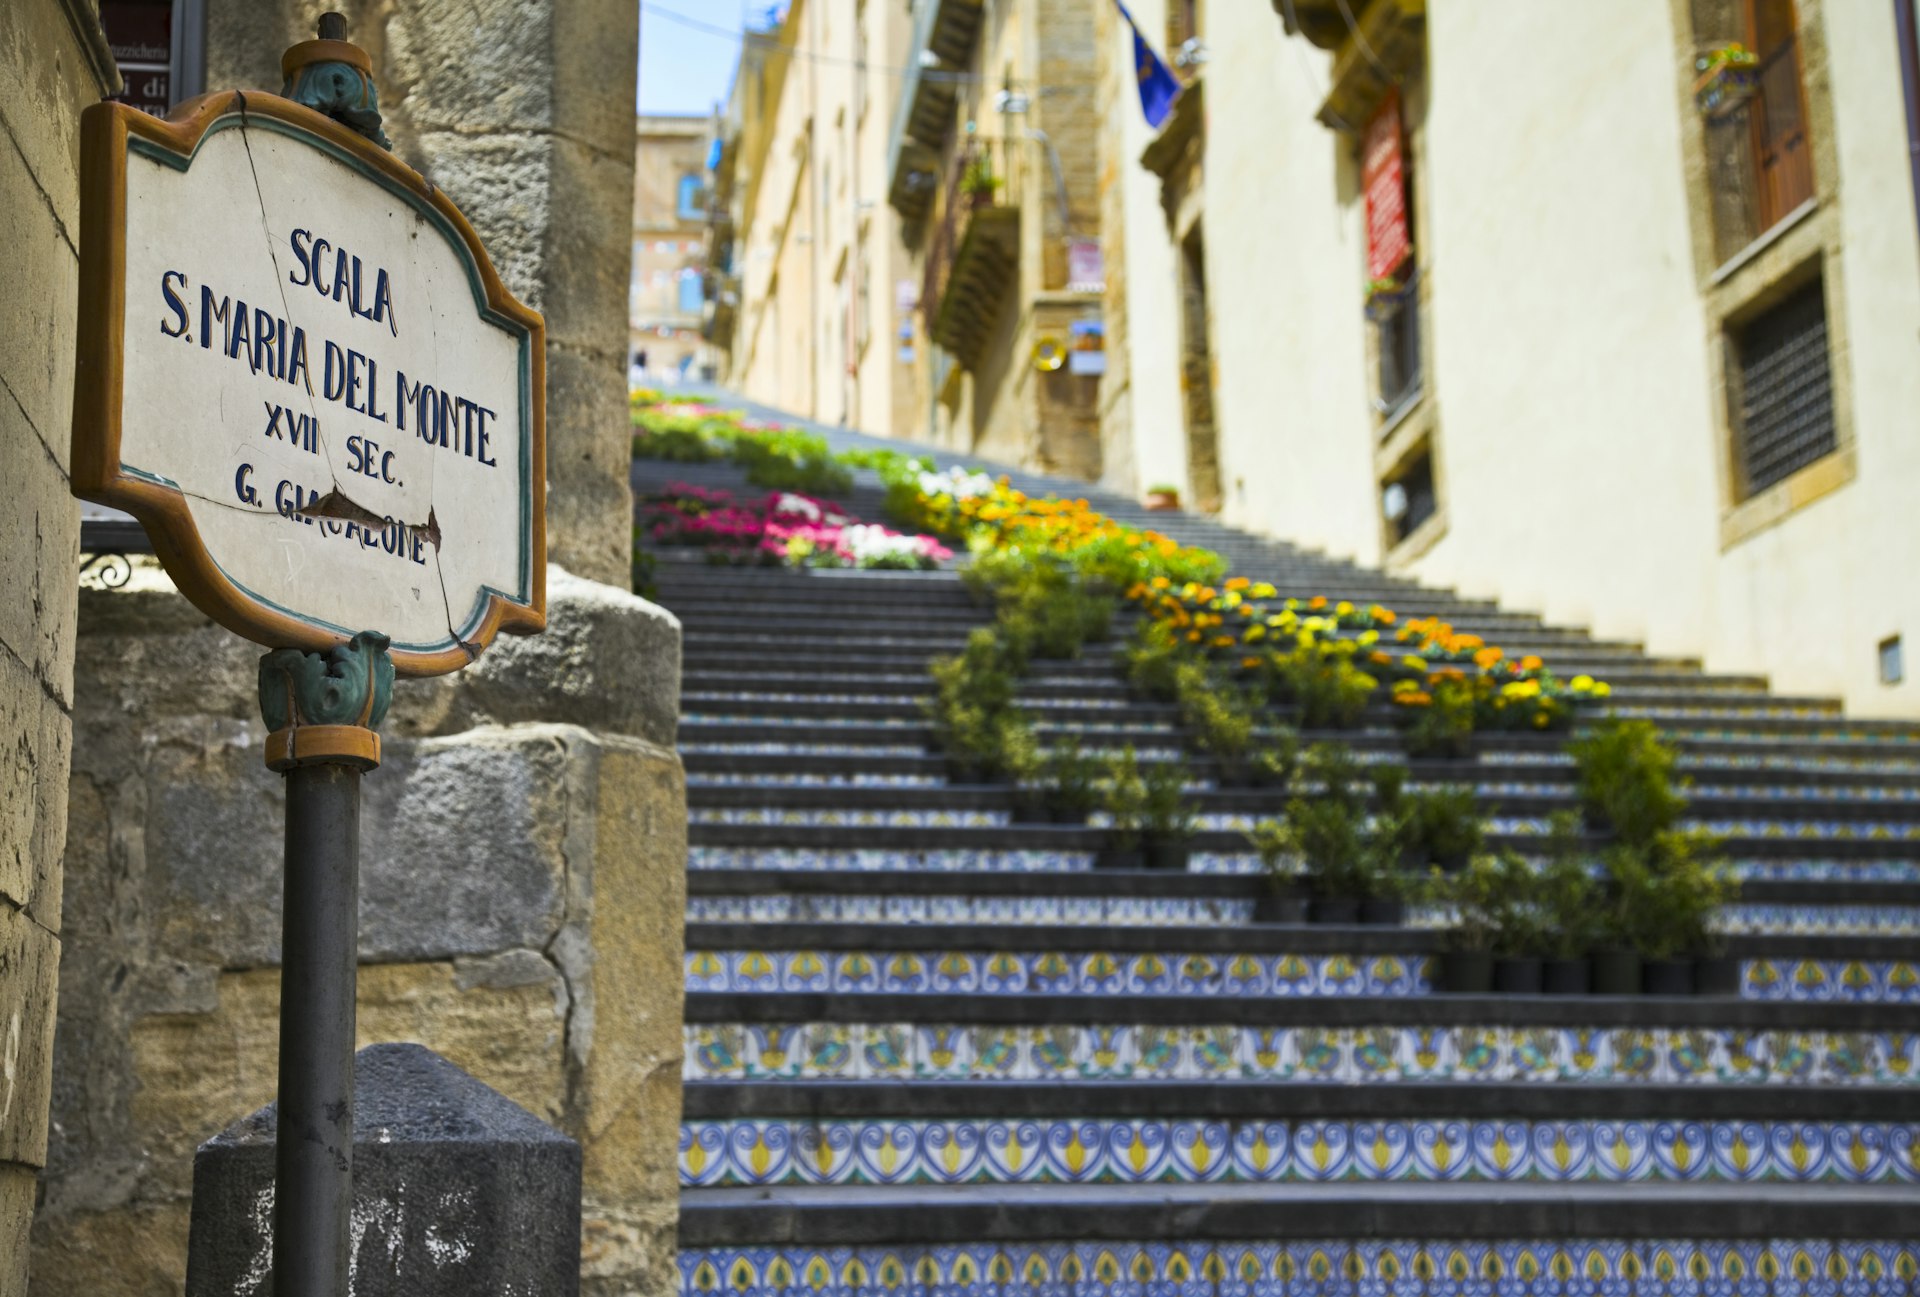 Staircase of Santa Maria del Monte (Scala di Santa Maria del Monte) in Caltagirone, Sicily The very long flight of steps is covered with colorfully painted tiles.